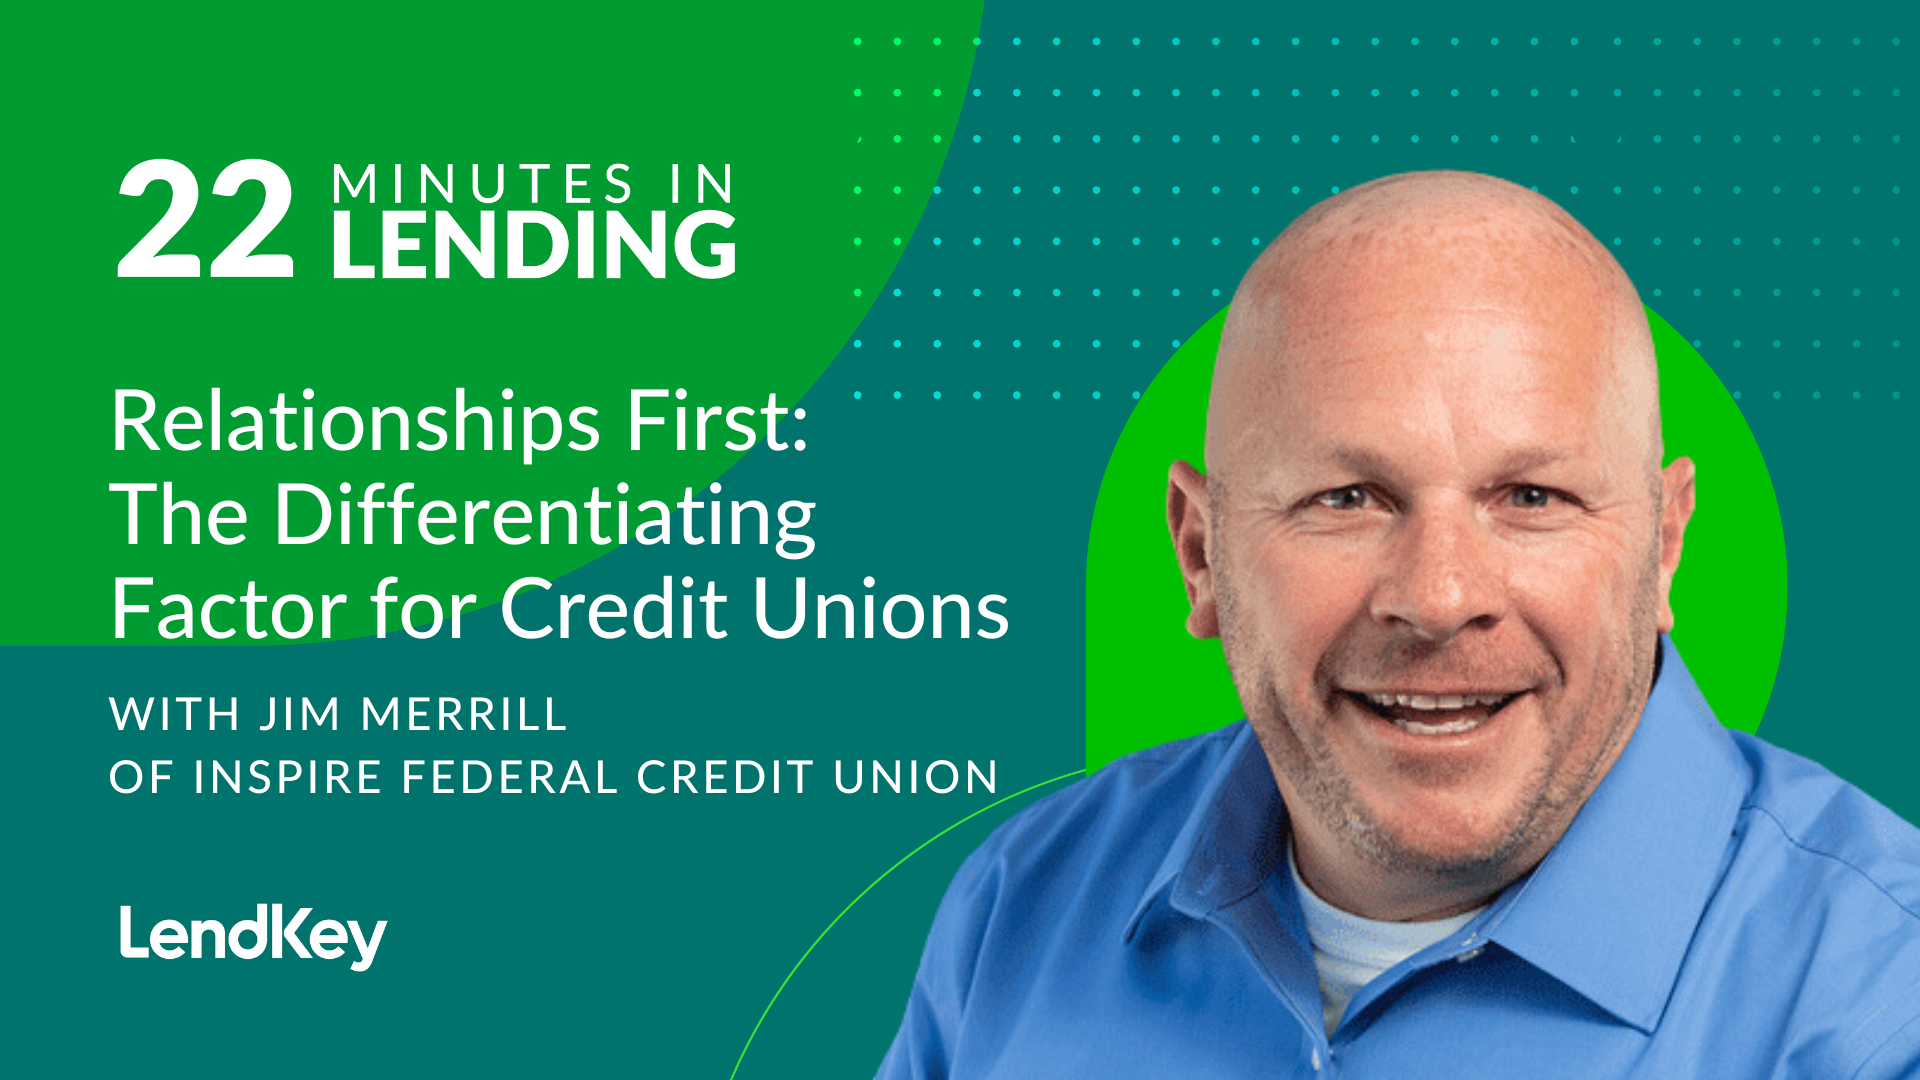 Featured image for “Relationships First: The Differentiating Factor for Credit Unions”